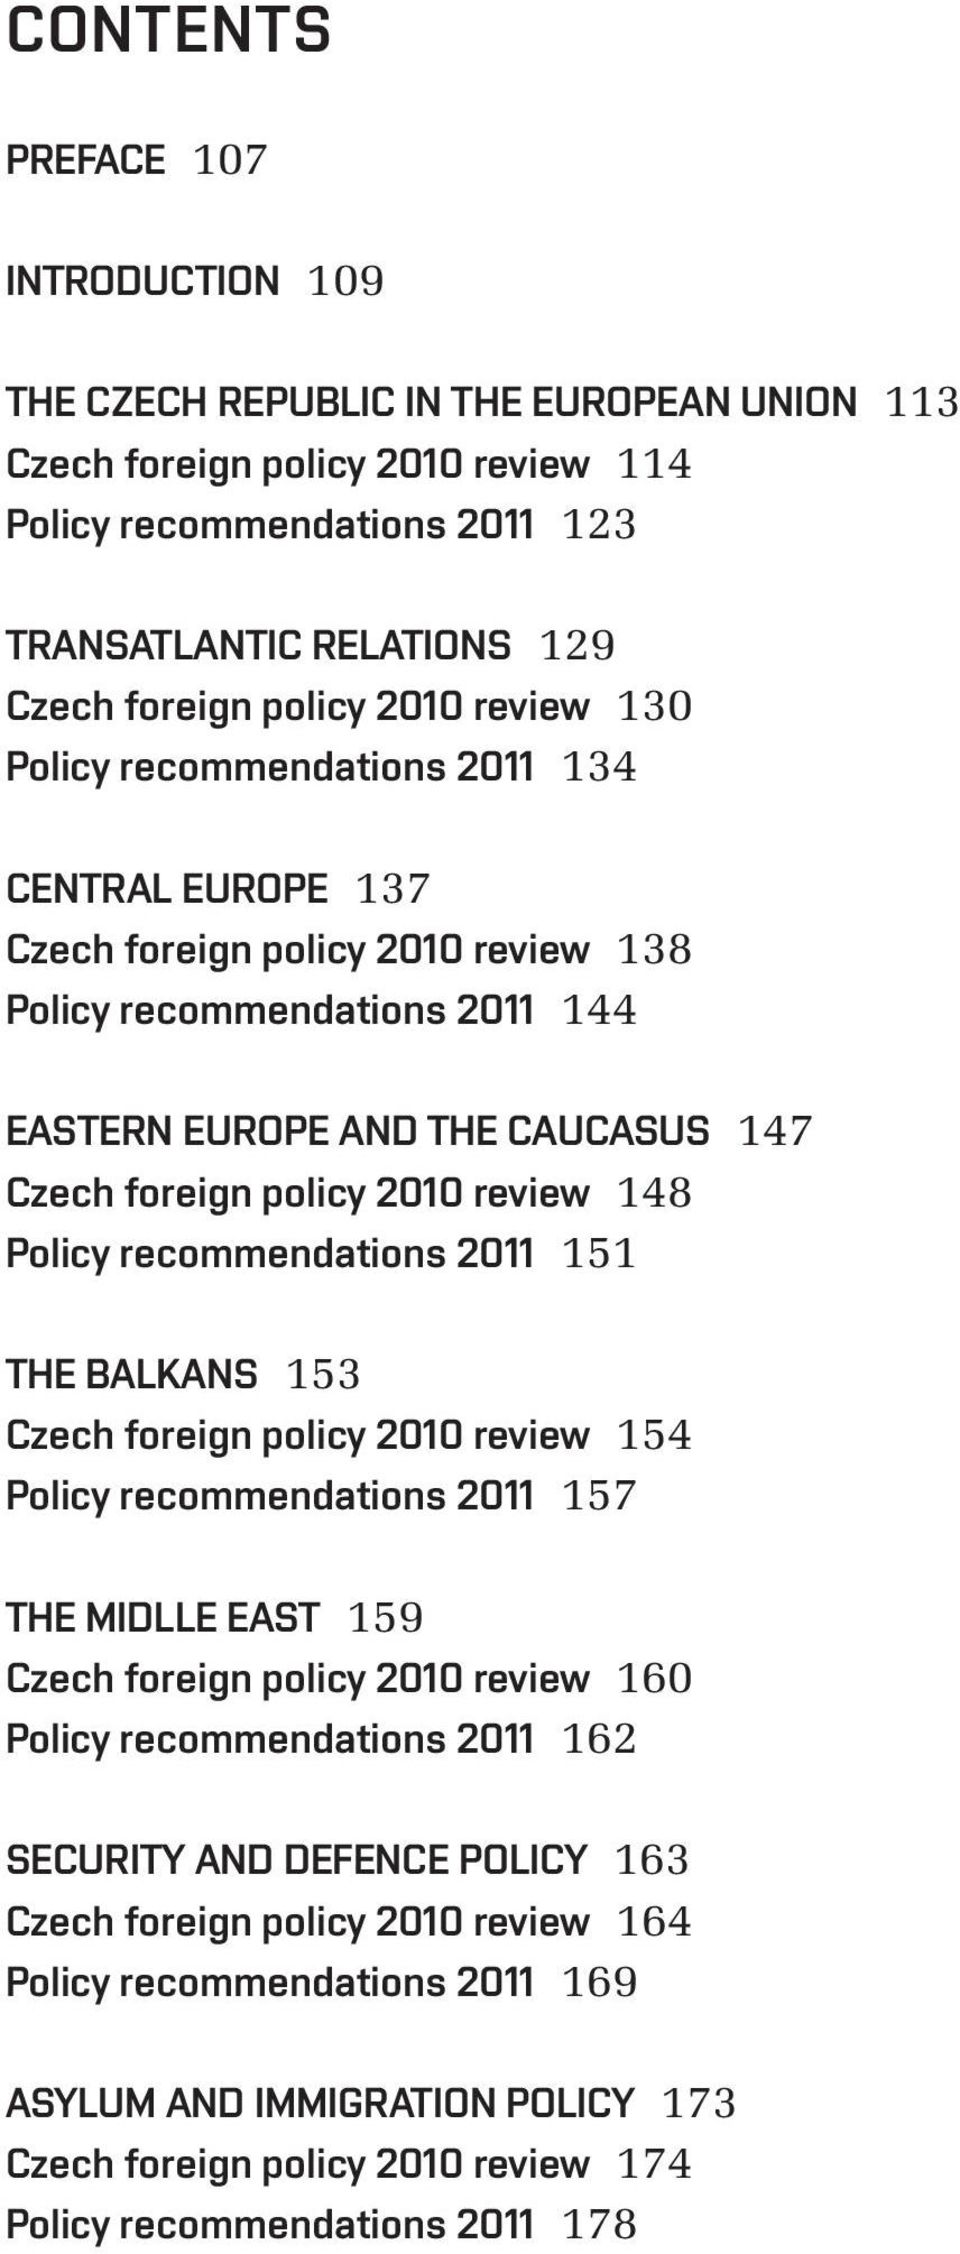 2010 review 148 Policy recommendations 2011 151 THE BALKANS 153 Czech foreign policy 2010 review 154 Policy recommendations 2011 157 THE MIDLLE EAST 159 Czech foreign policy 2010 review 160 Policy